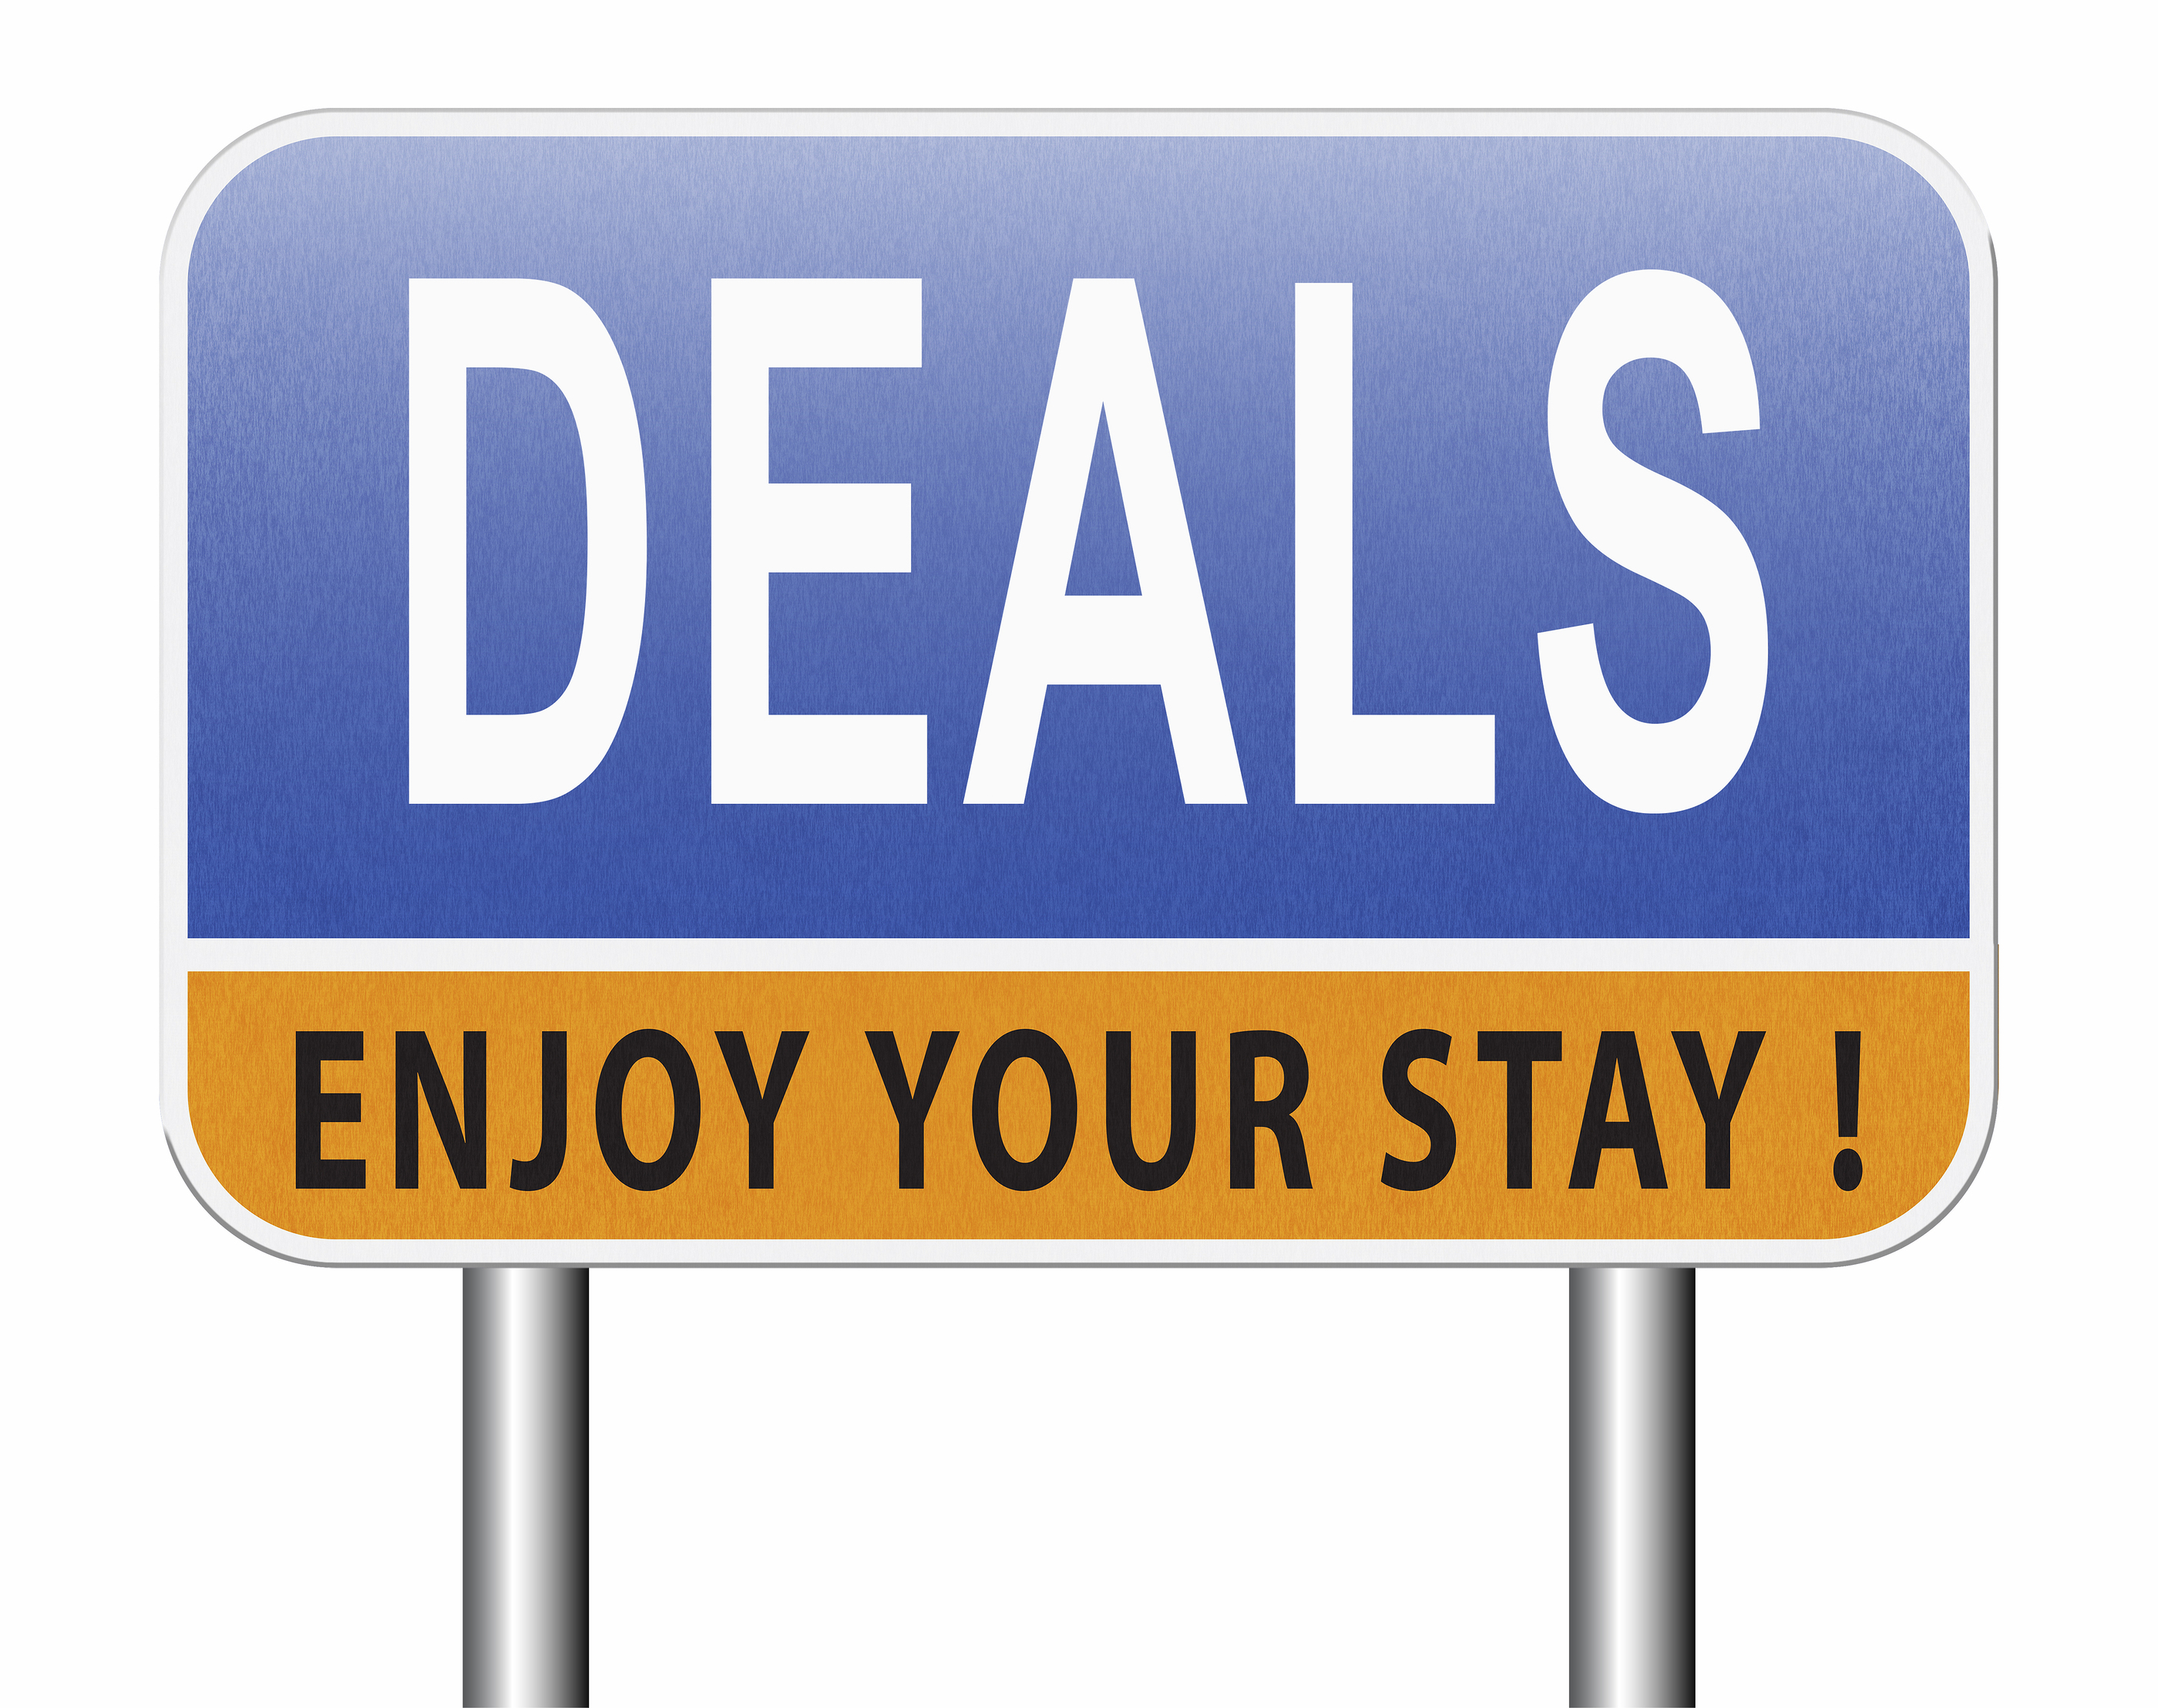 Black Friday and Cyber Monday Hotel Deals!